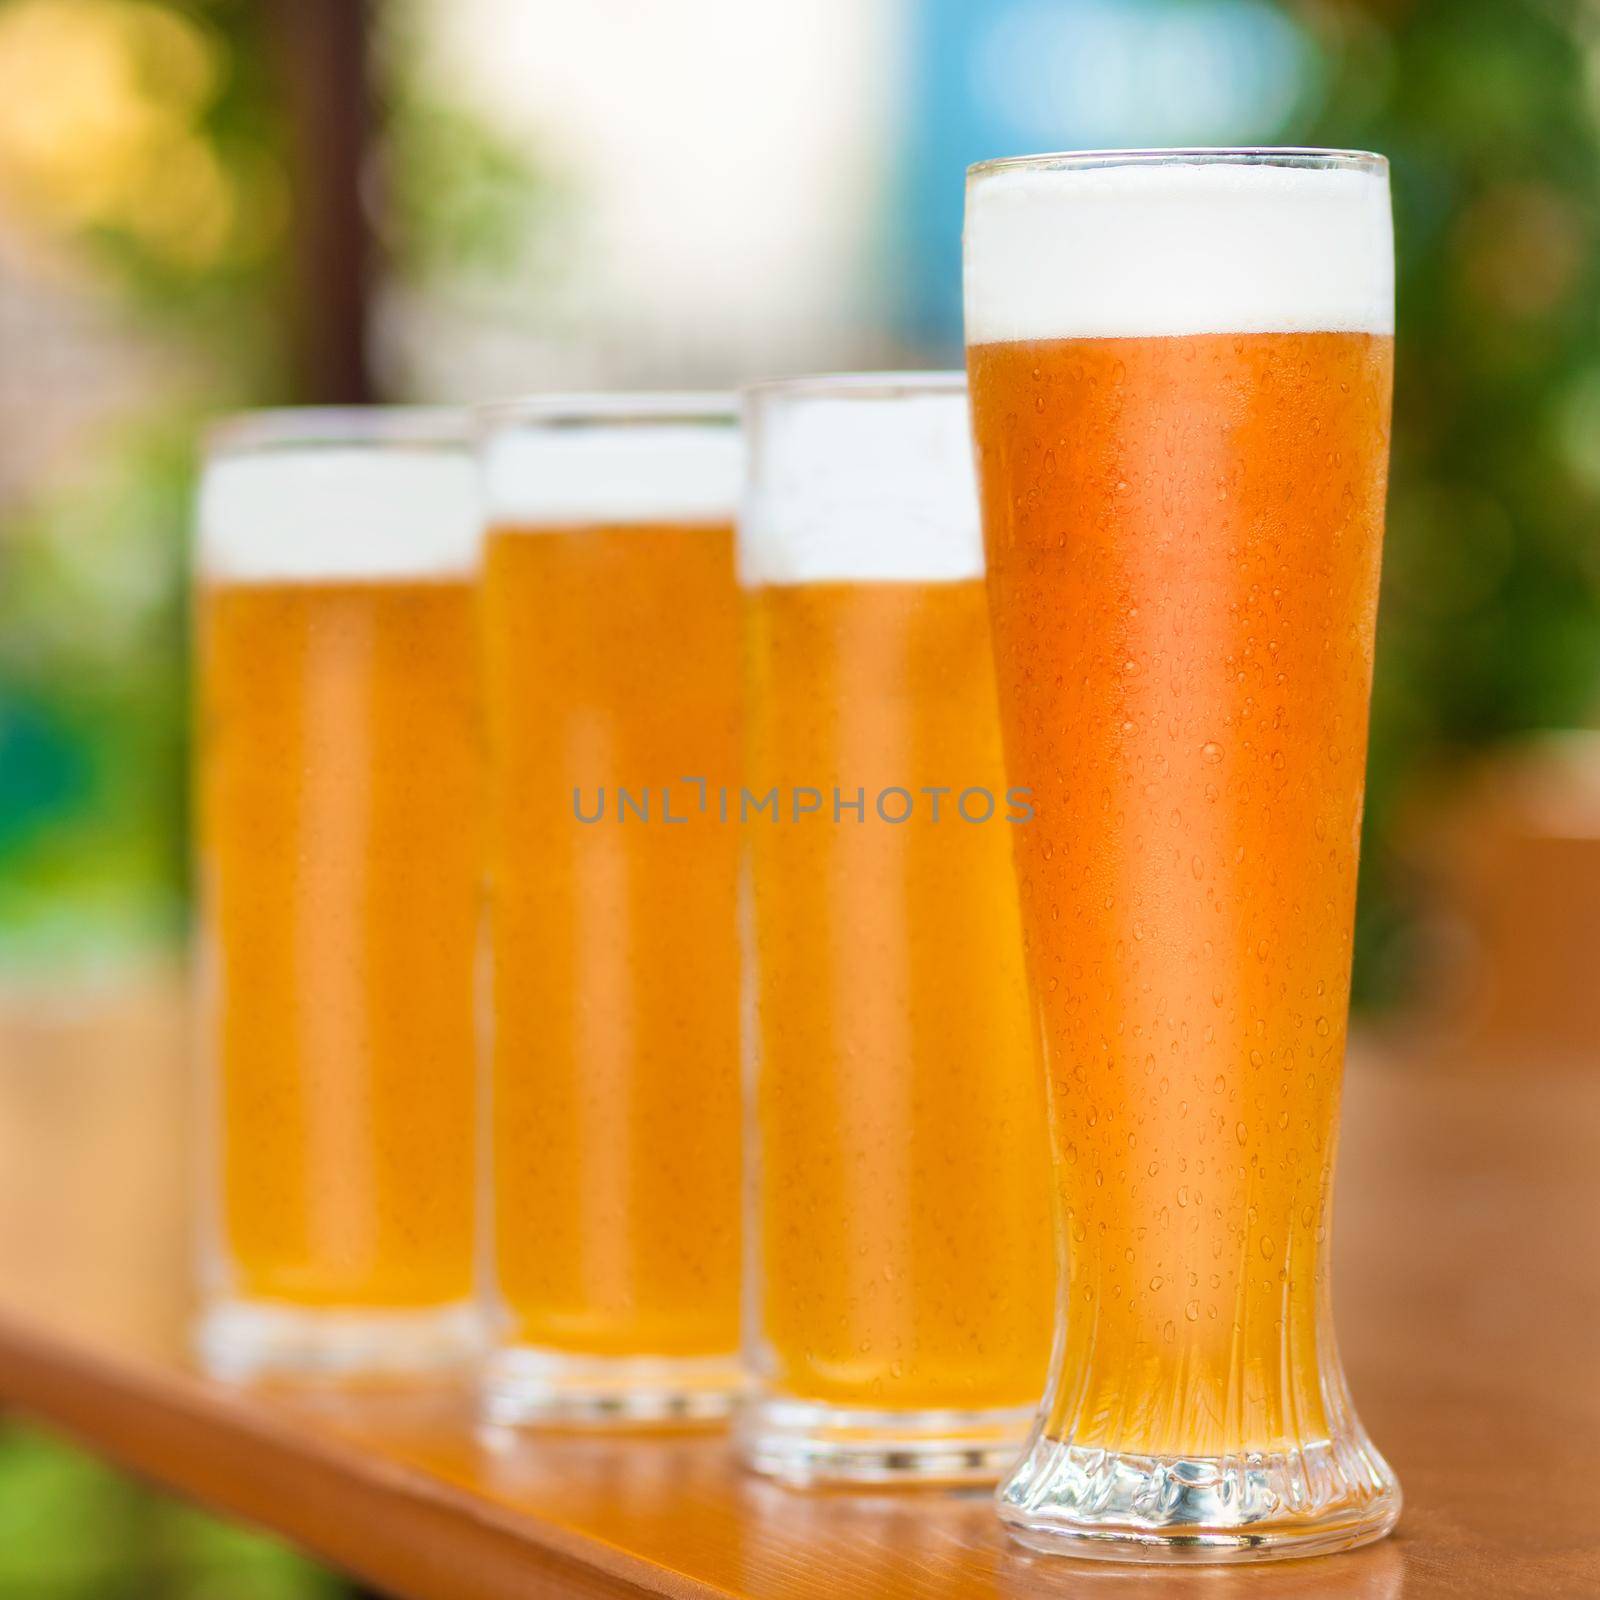 Beer mugs, glasses side by side with green background